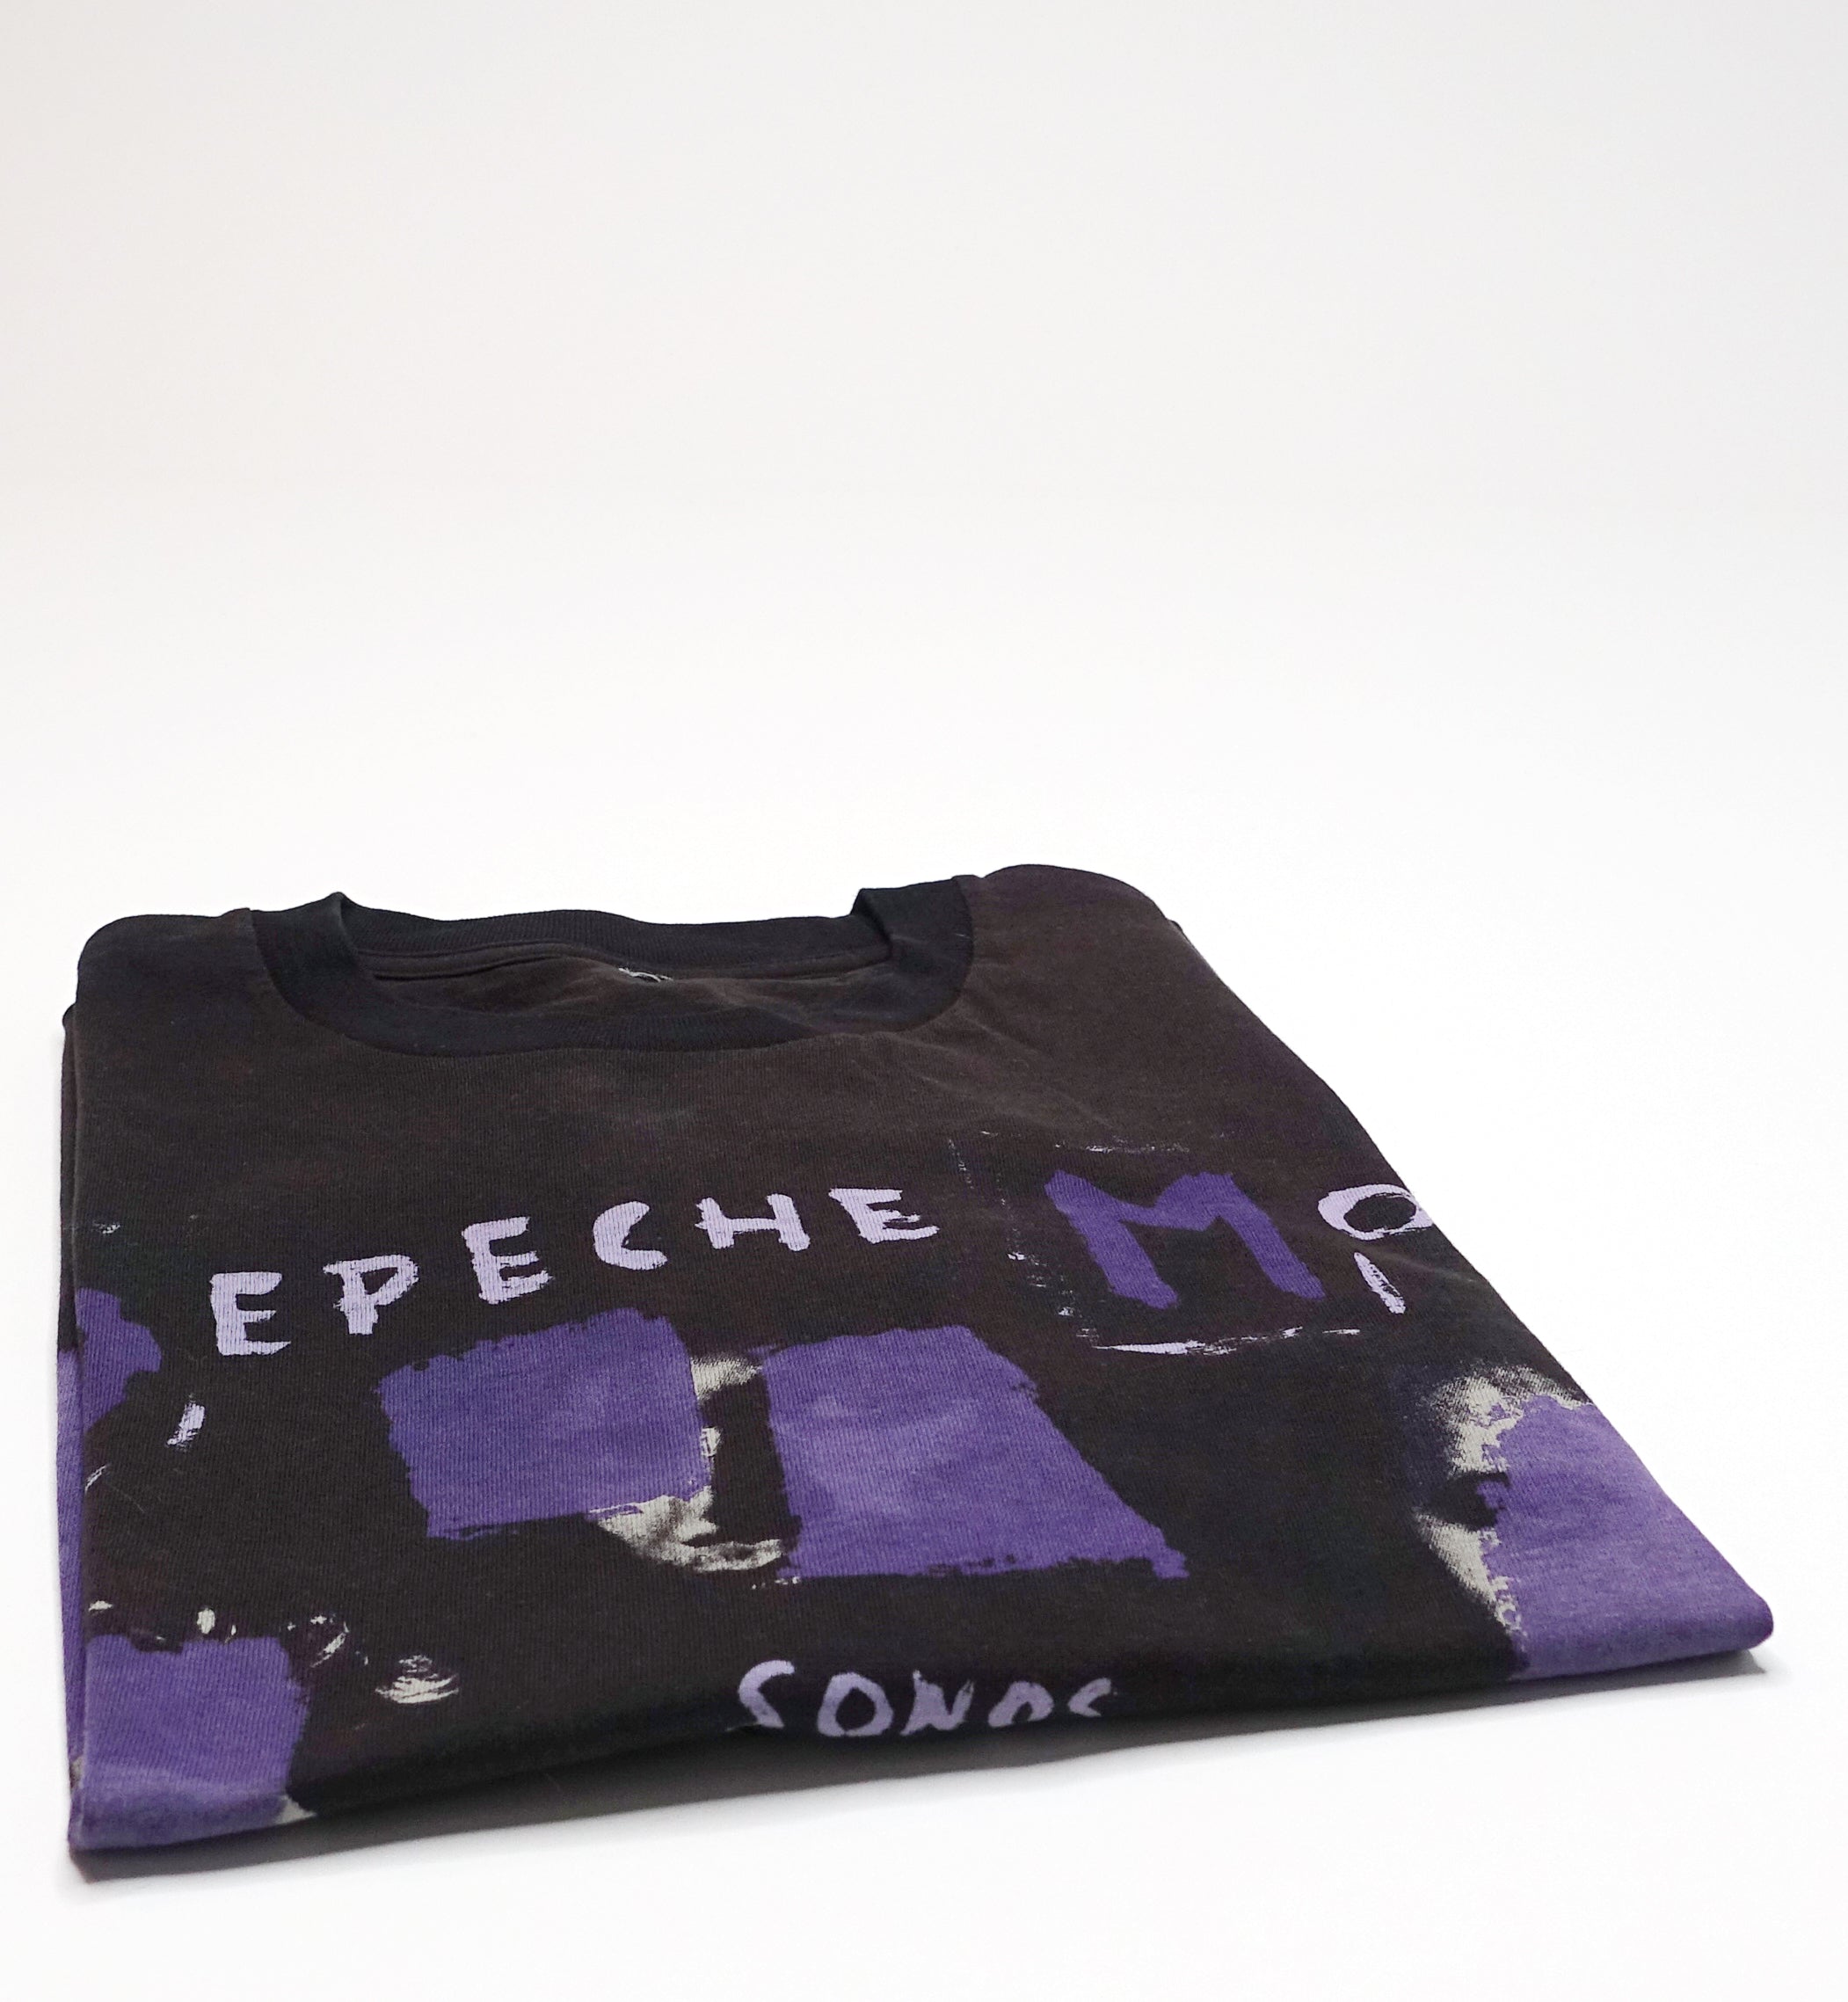 Depeche Mode – Songs Of Faith And Devotion 1993 Tour Shirt Size Large